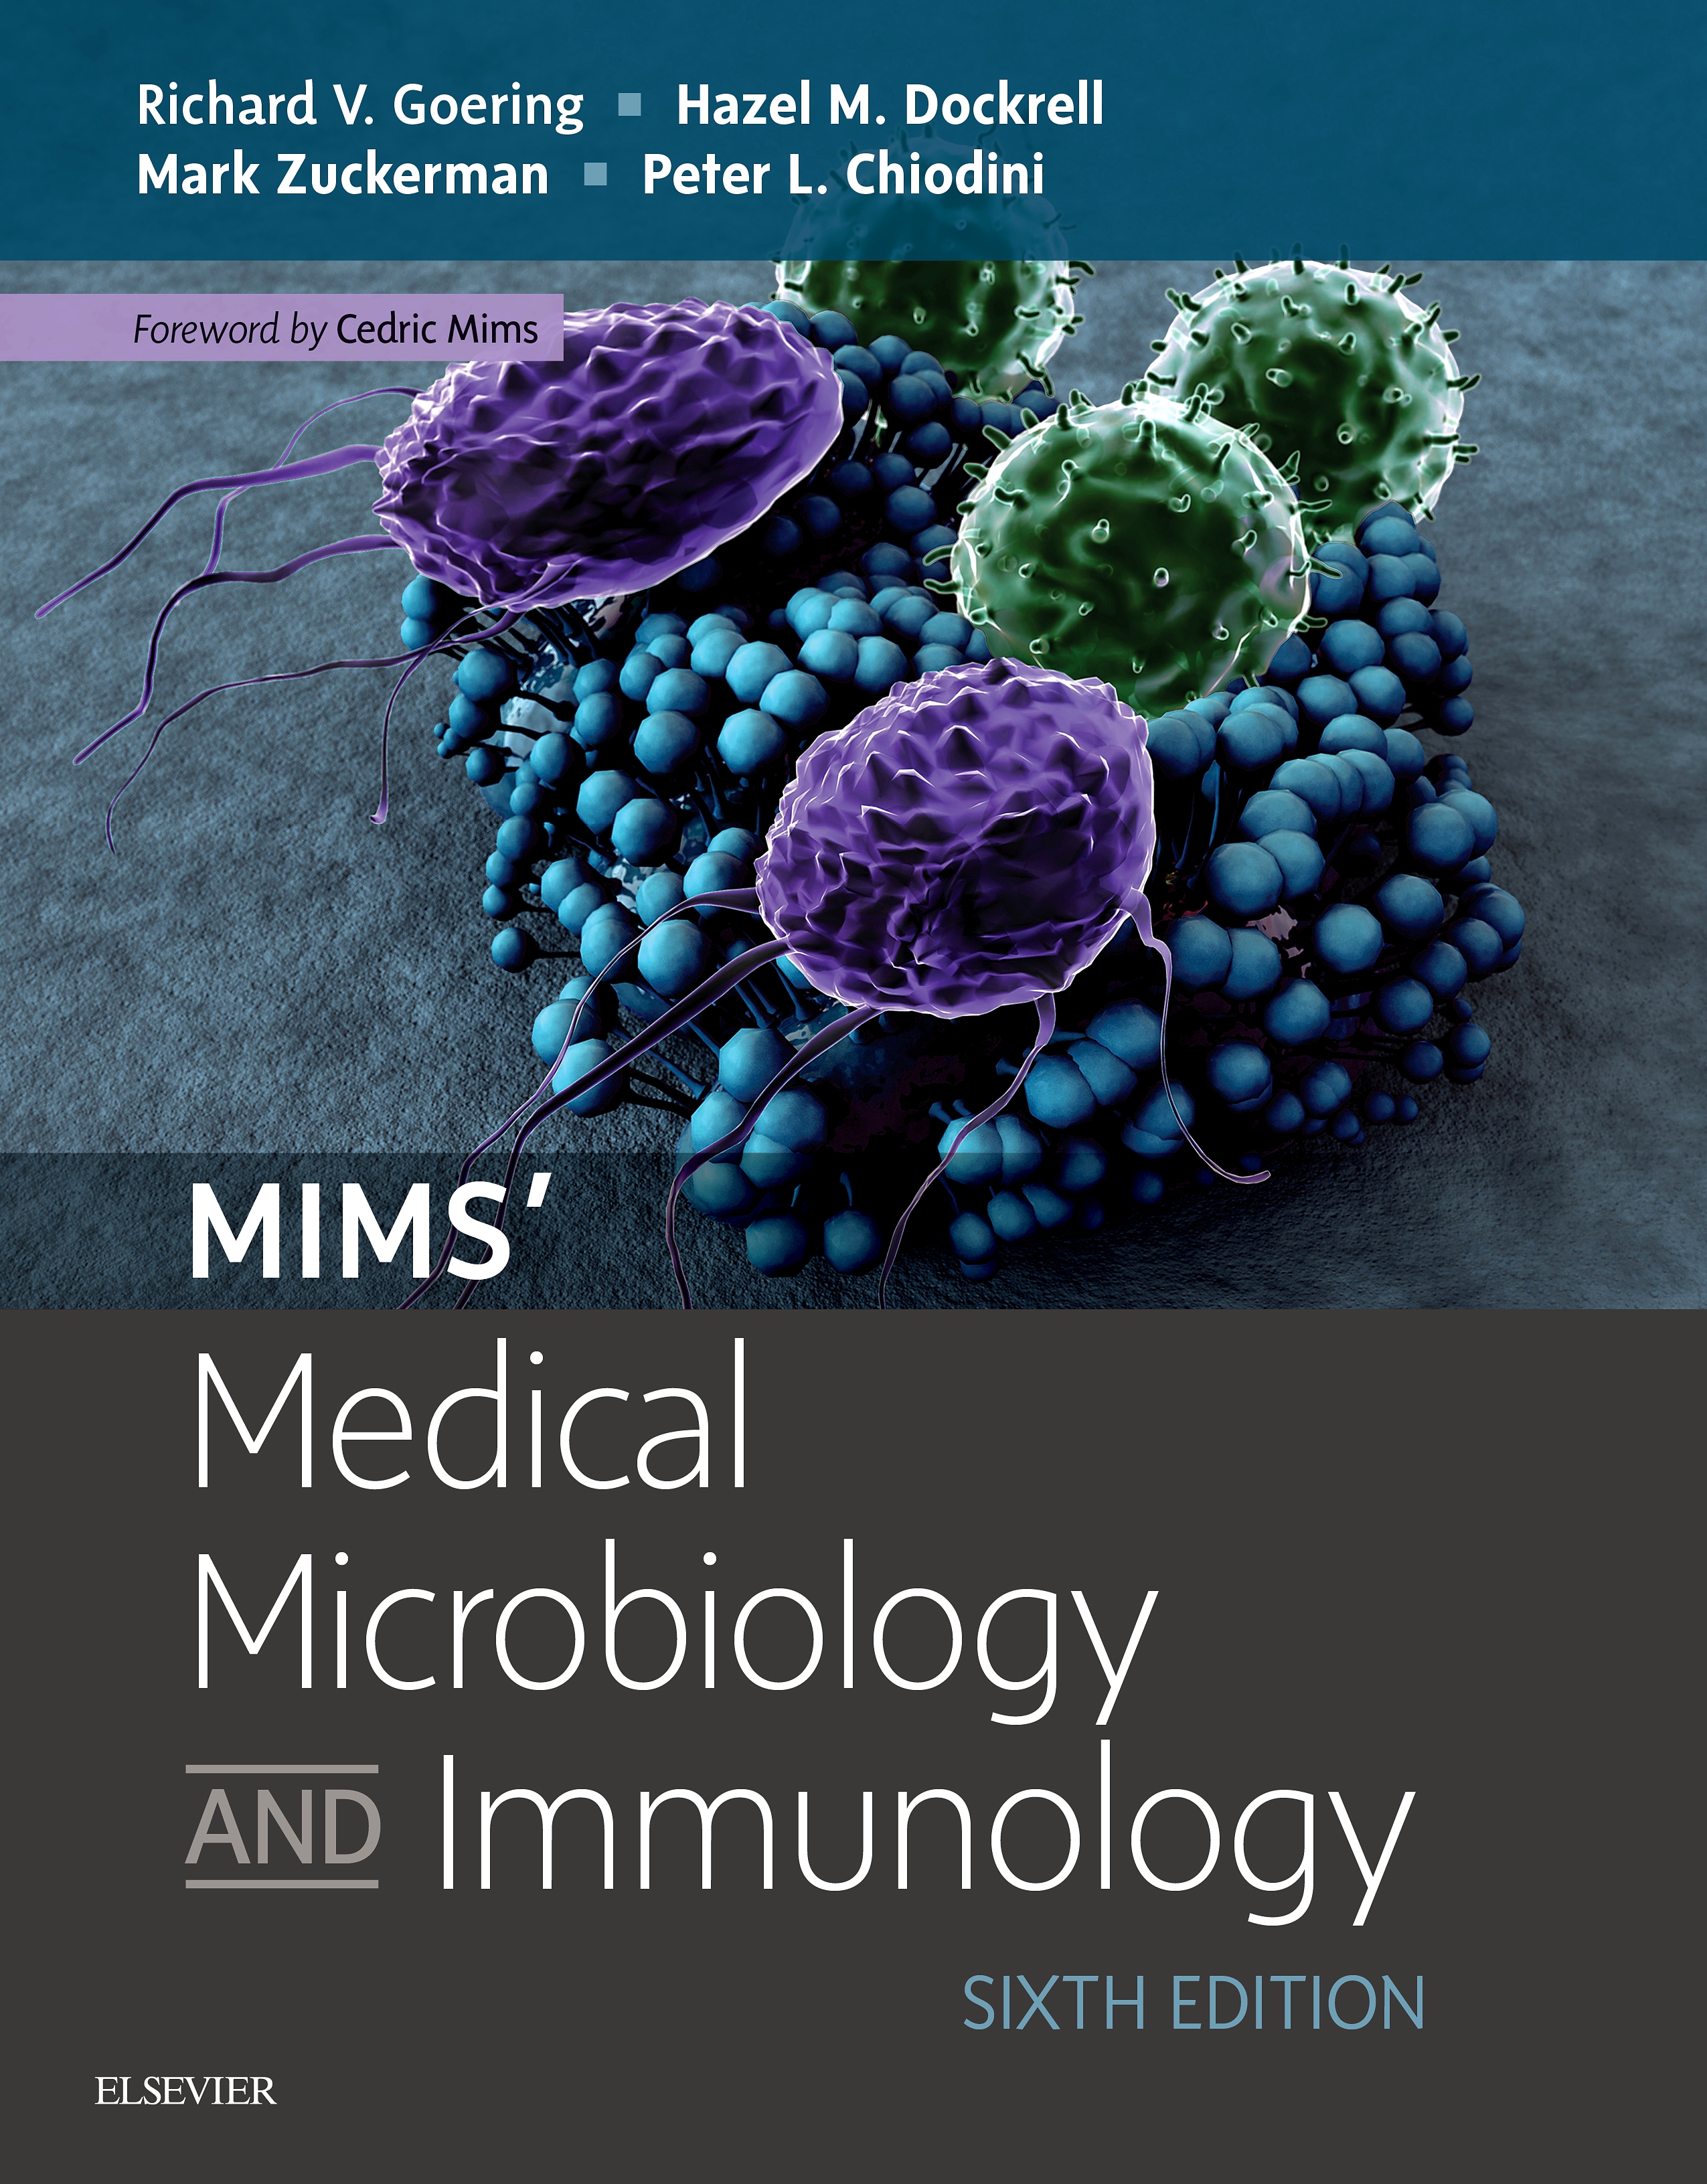 Evolve Resources for Mims' Medical Microbiology, 6th Edition